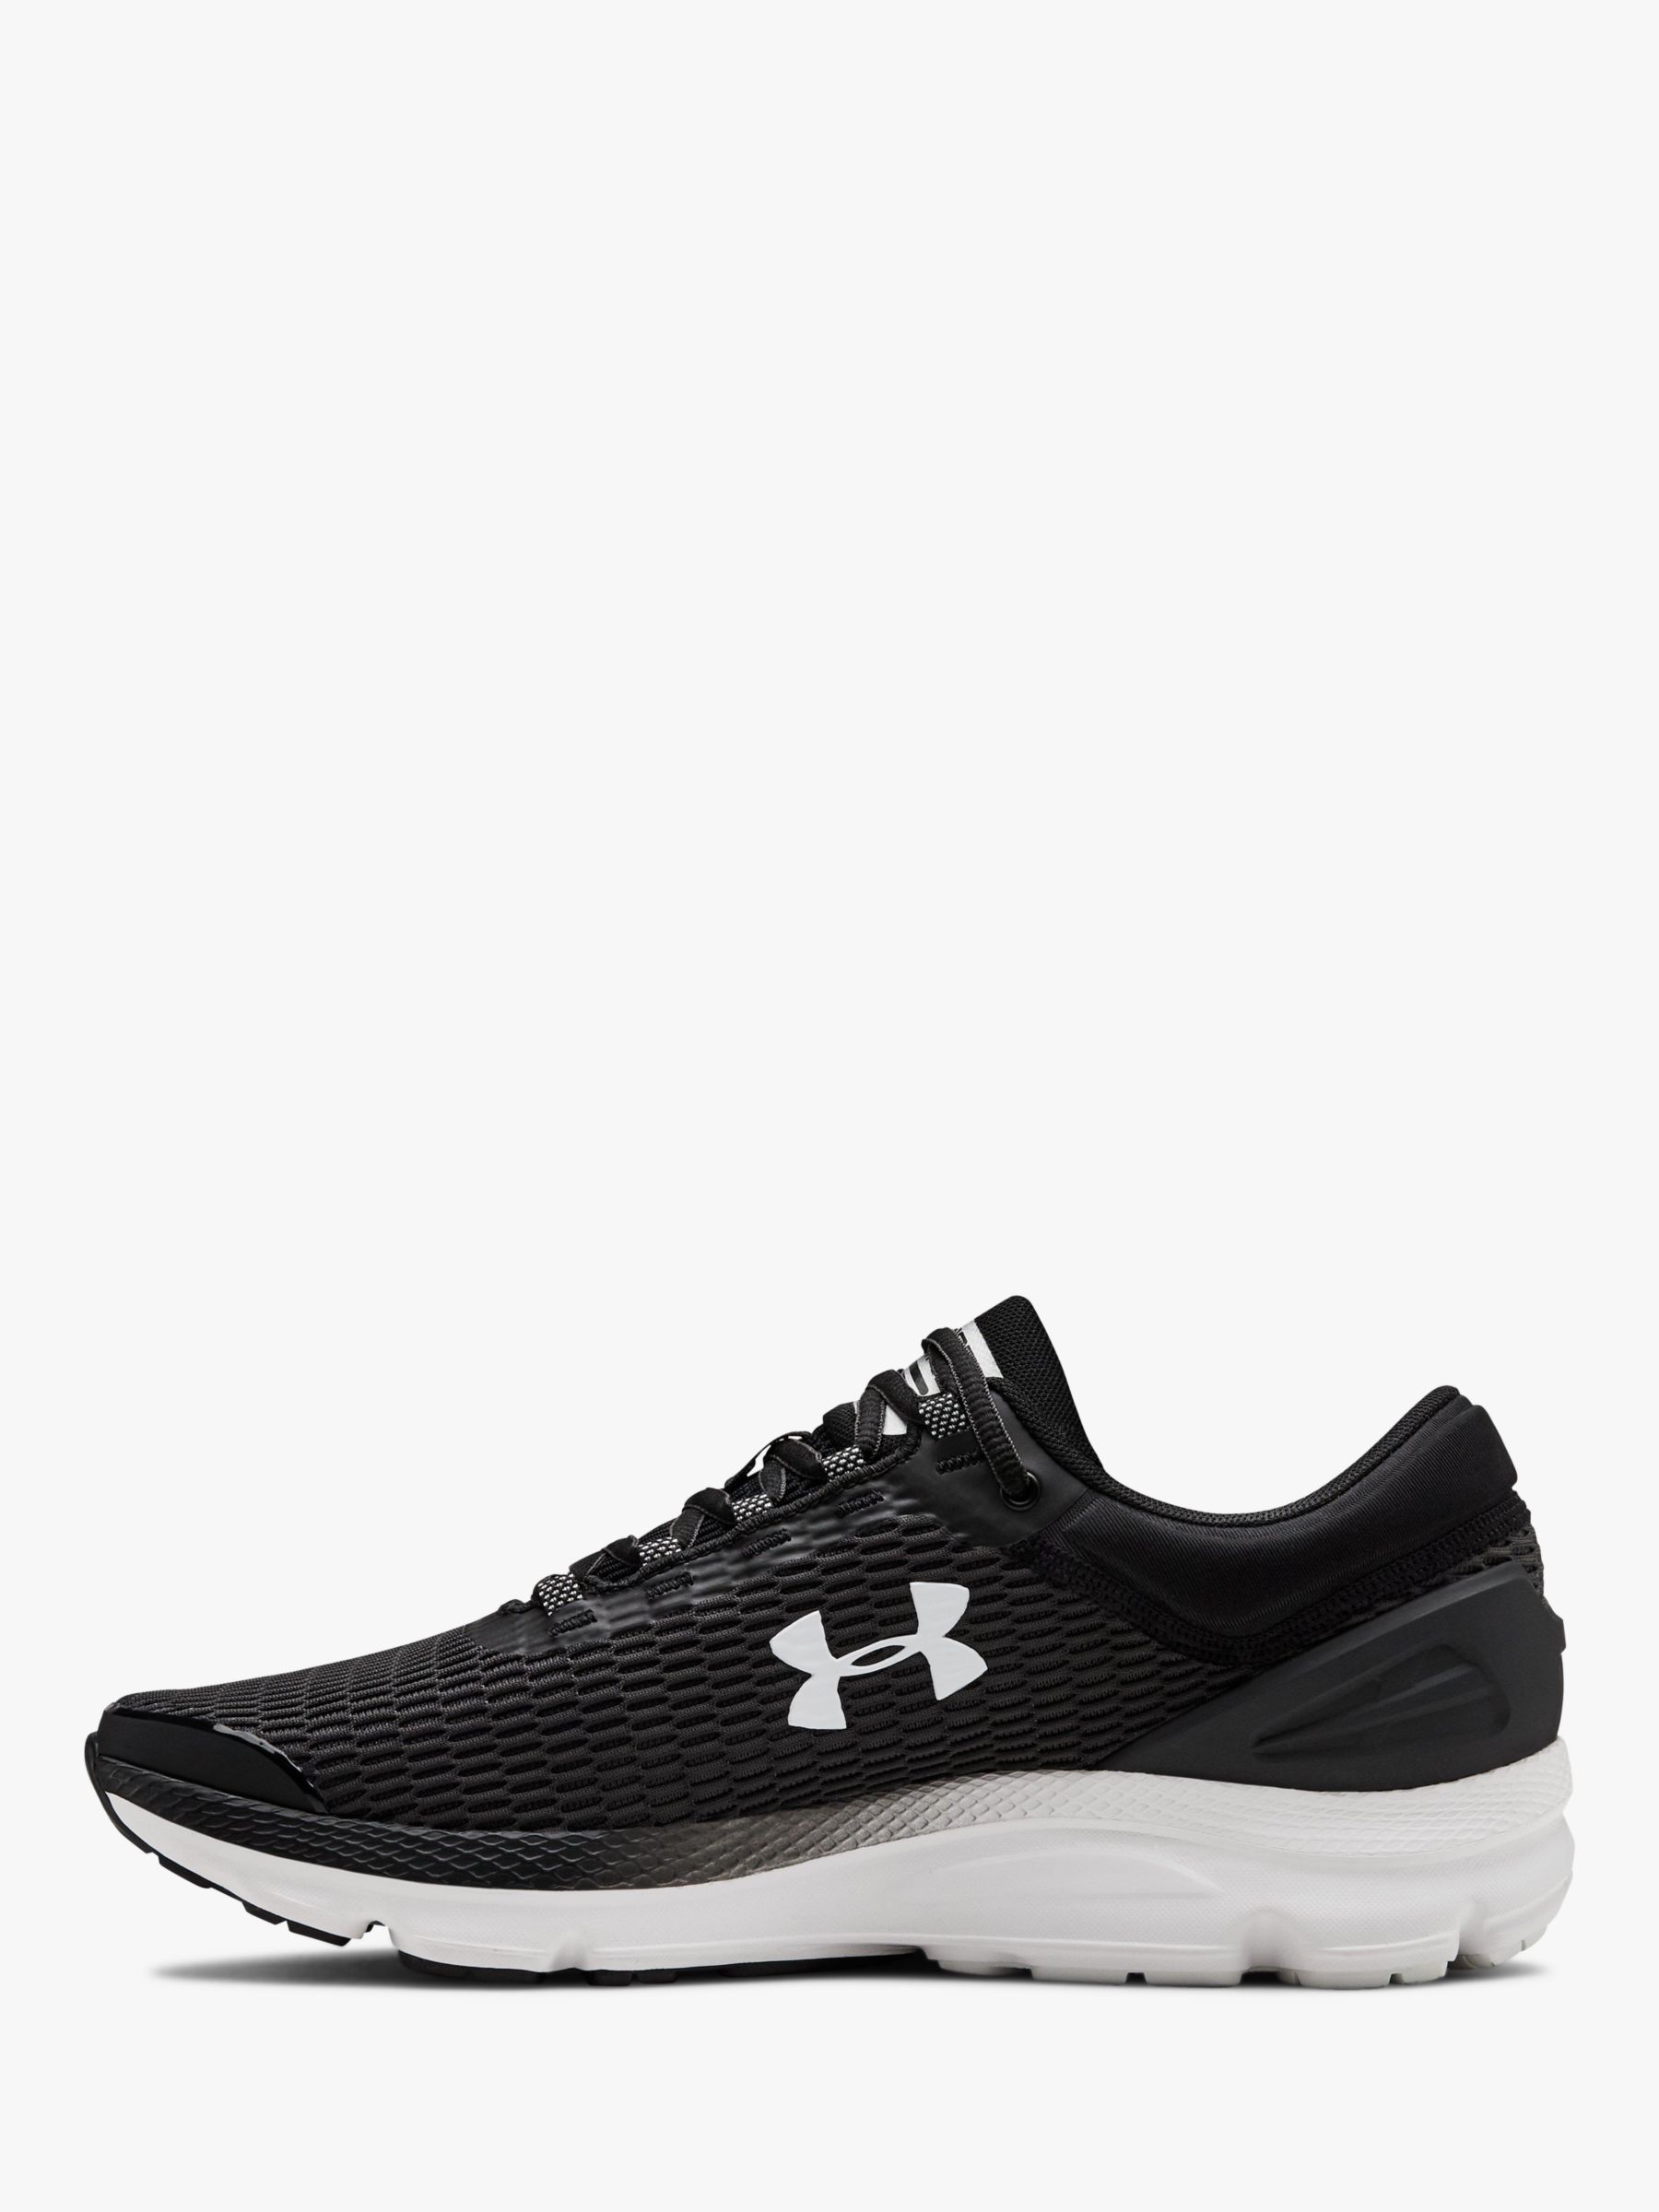 Under Armour Charged Intake 3 Men's Running Shoes, Black/White